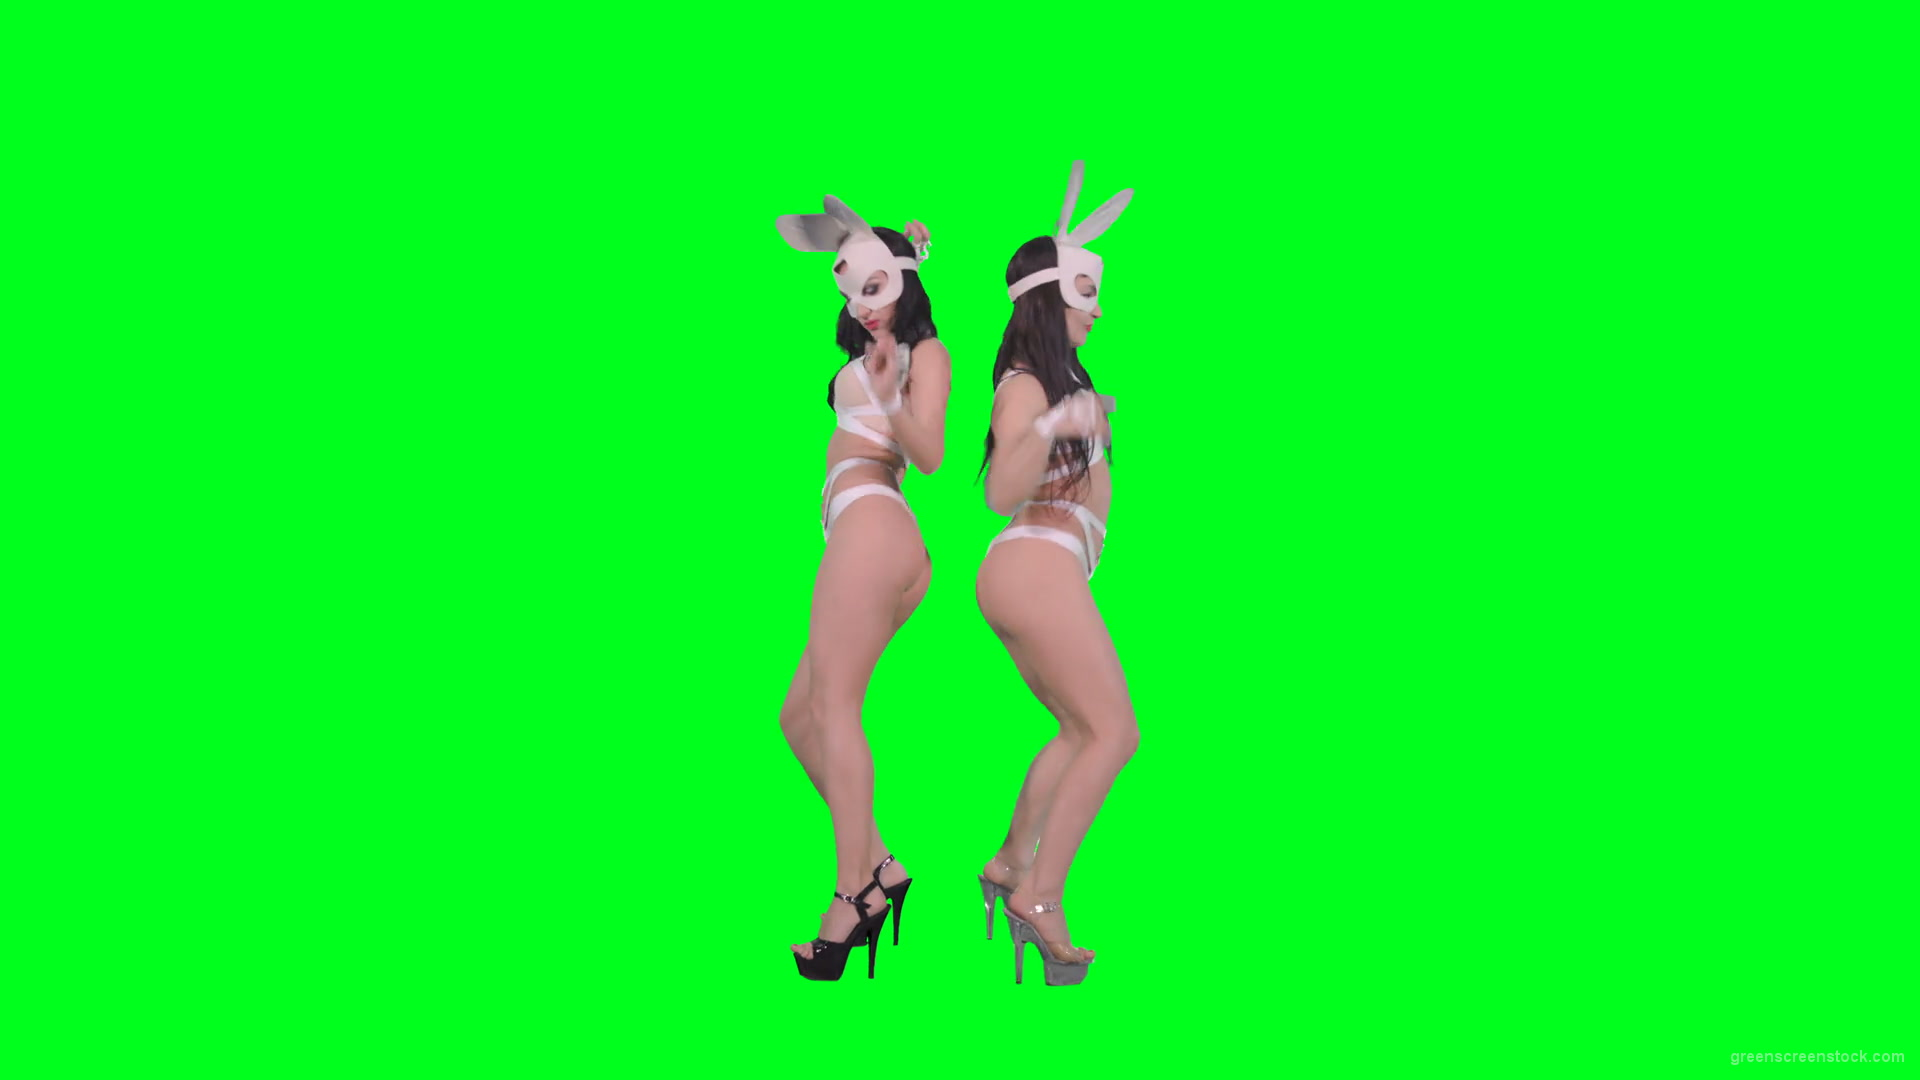 Go-Go-Dancing-female-team-duet-making-erotic-moves-on-green-screen-4K-Video-Footage-1920_002 Green Screen Stock